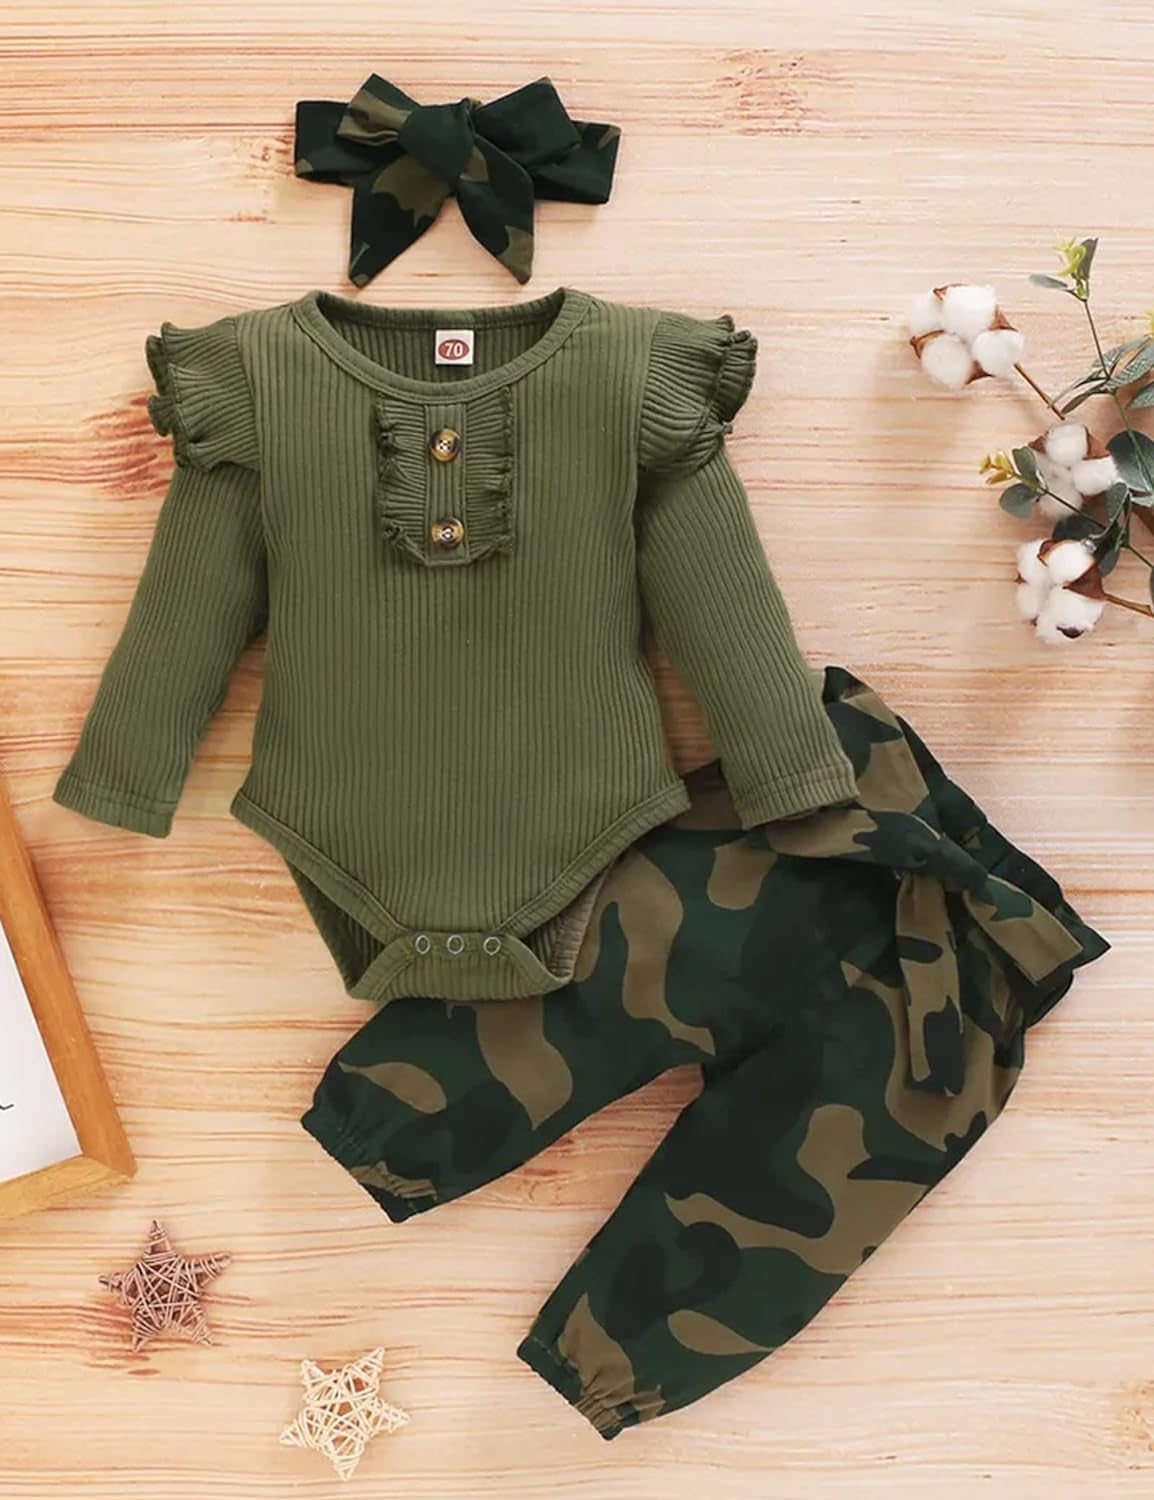 Baby Girls Clothes Cute Baby Clothes Girls Romper + Pant 3Pcs Winter Outfit Newborn Light Brown